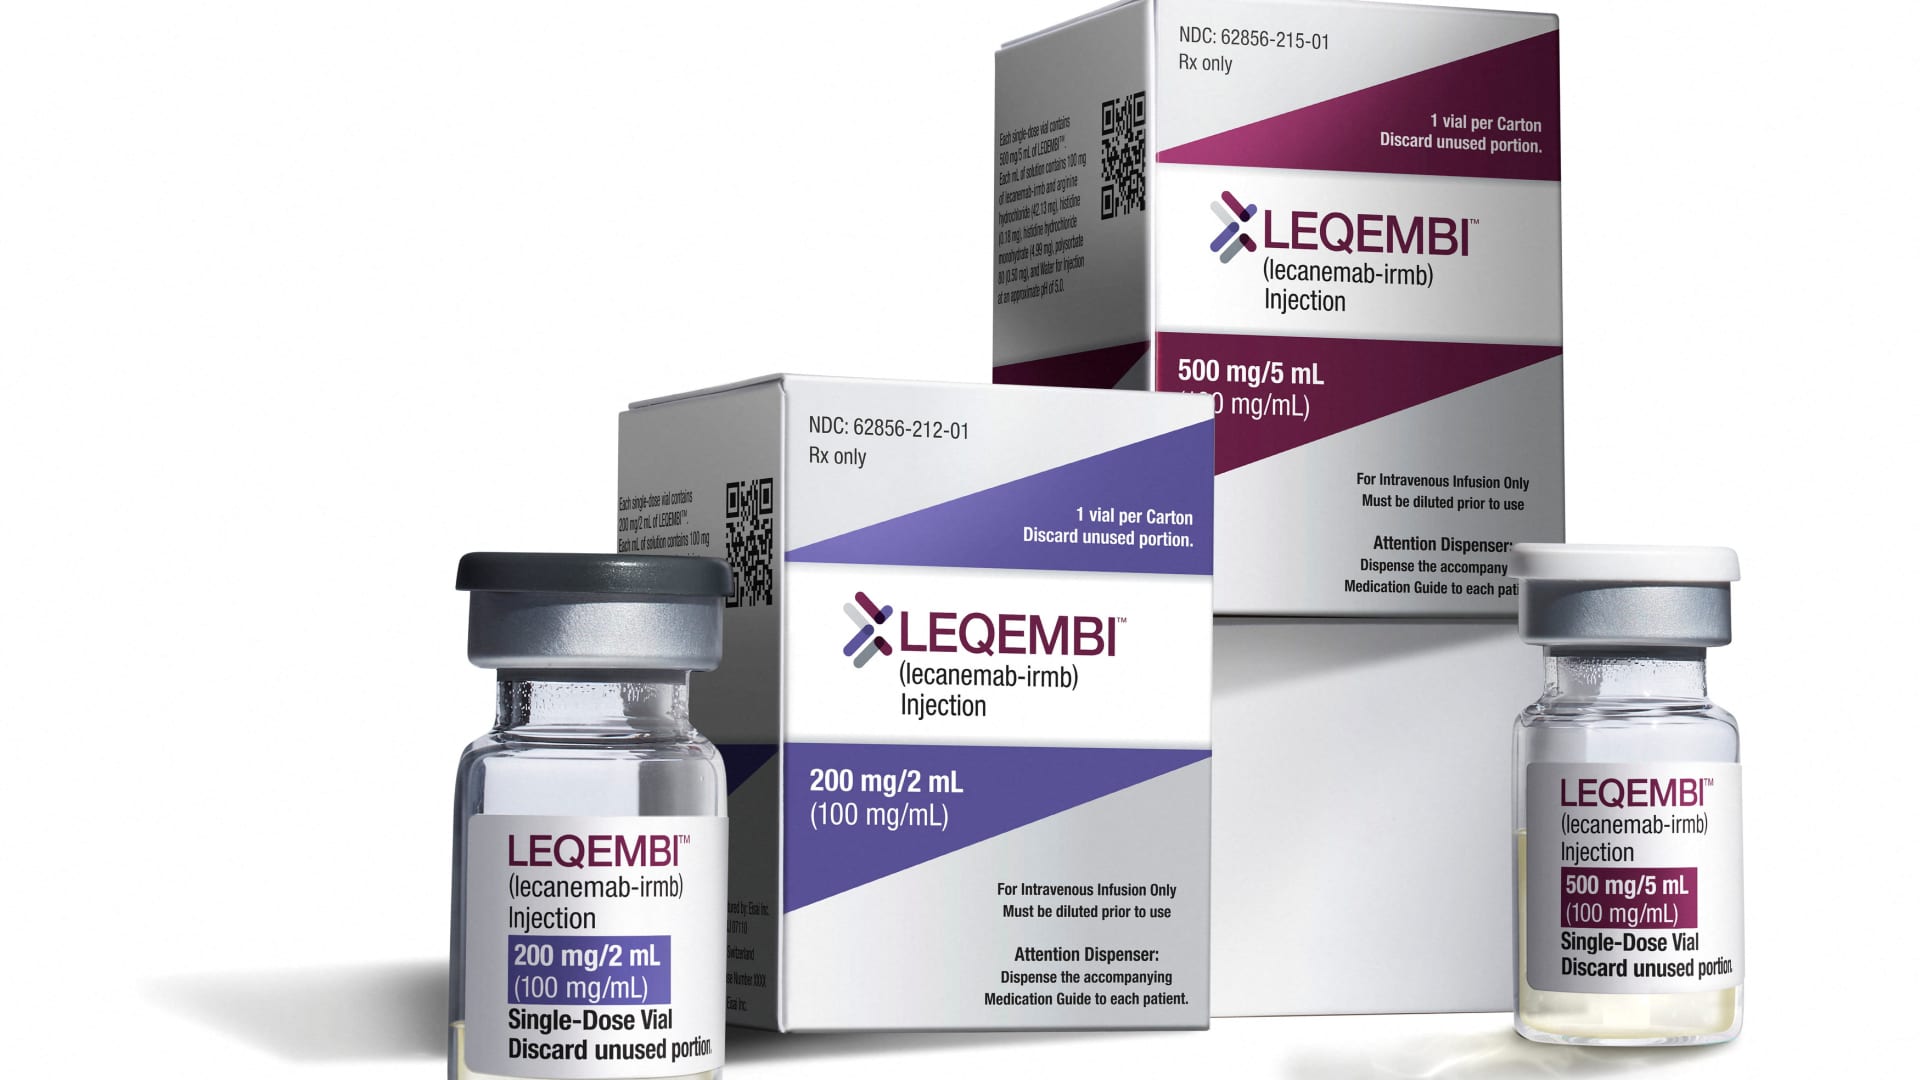 Alzheimer's treatment Leqembi could cost Medicare up to $5 billion per year, study estimates